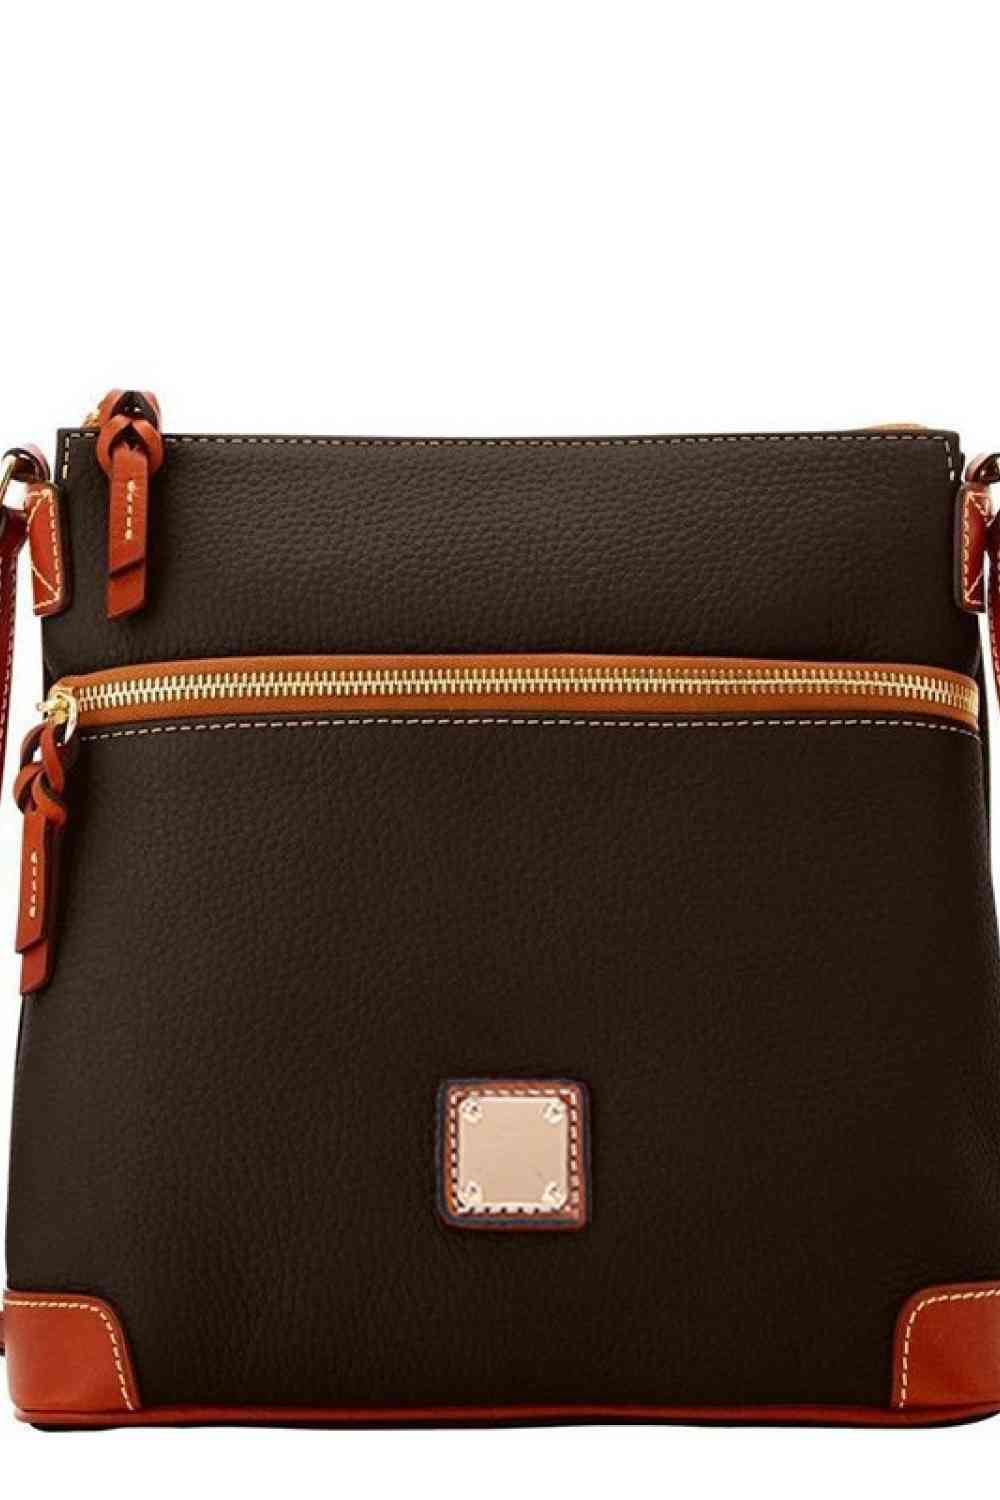 Square Vegan Leather Crossbody Bag Coffee Brown / One Size